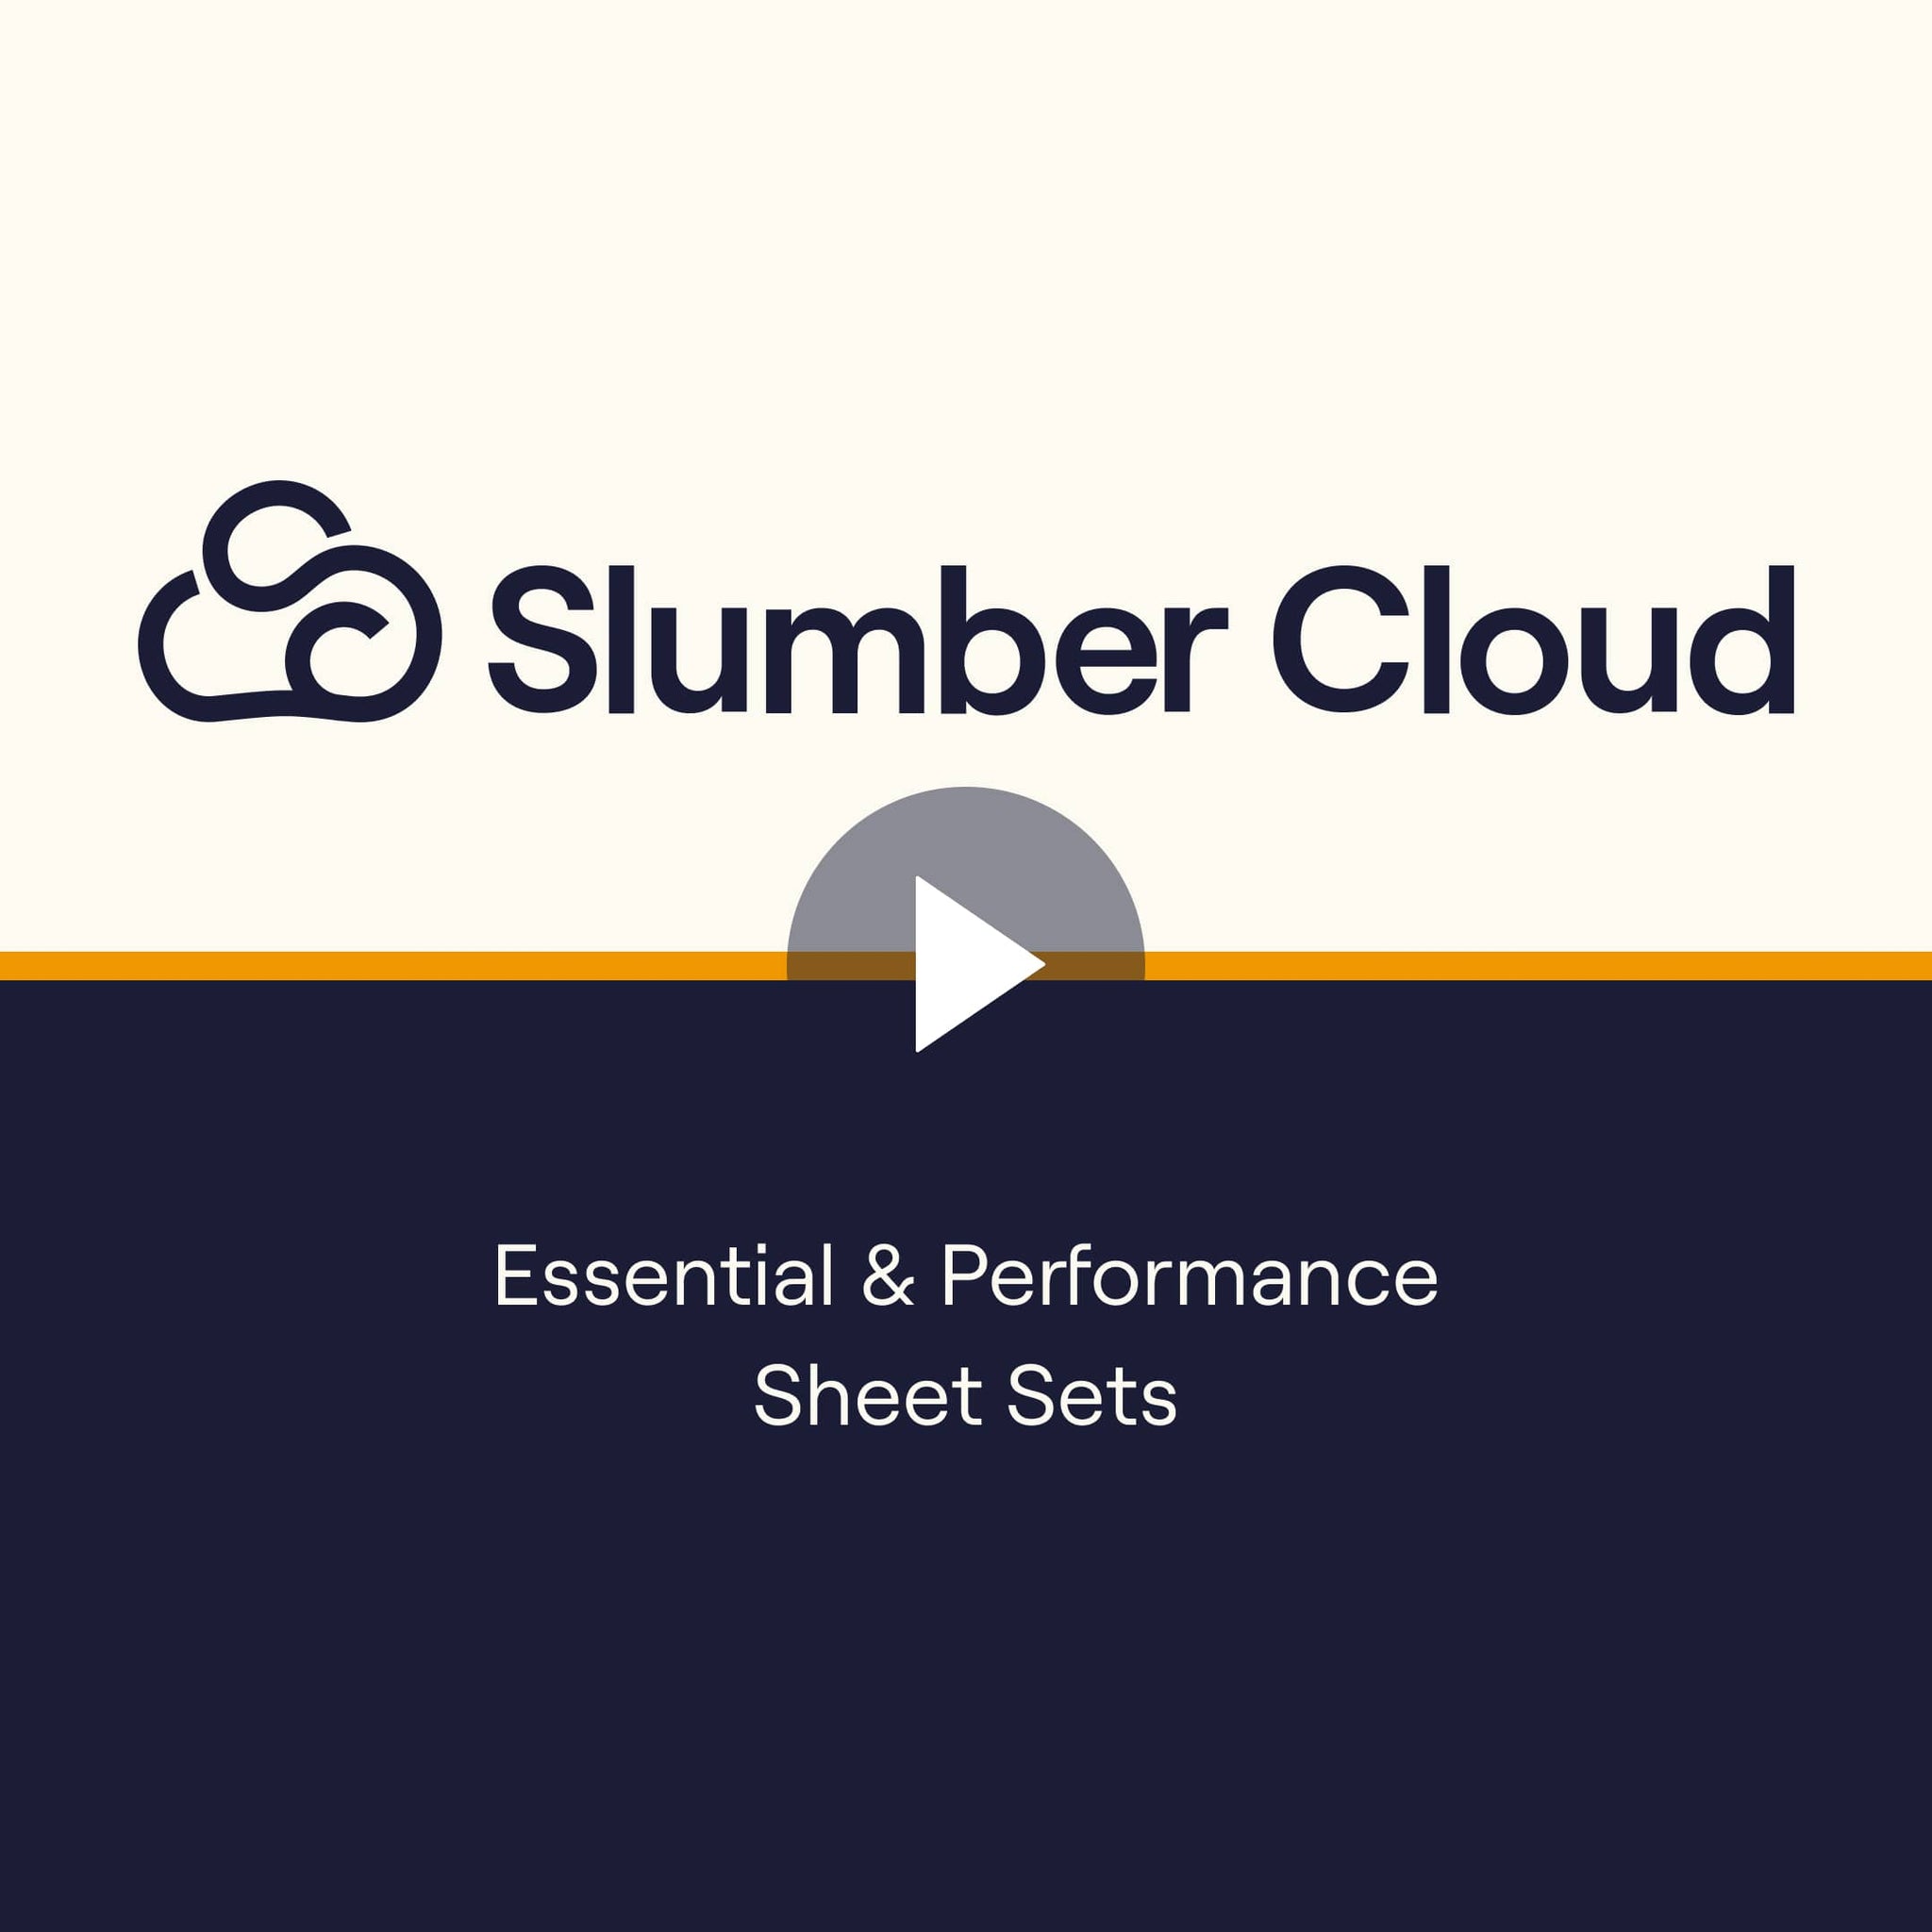 Slumber Cloud video outlining the Essential Sheets and the Performance Sheets using temperature regulation technology.